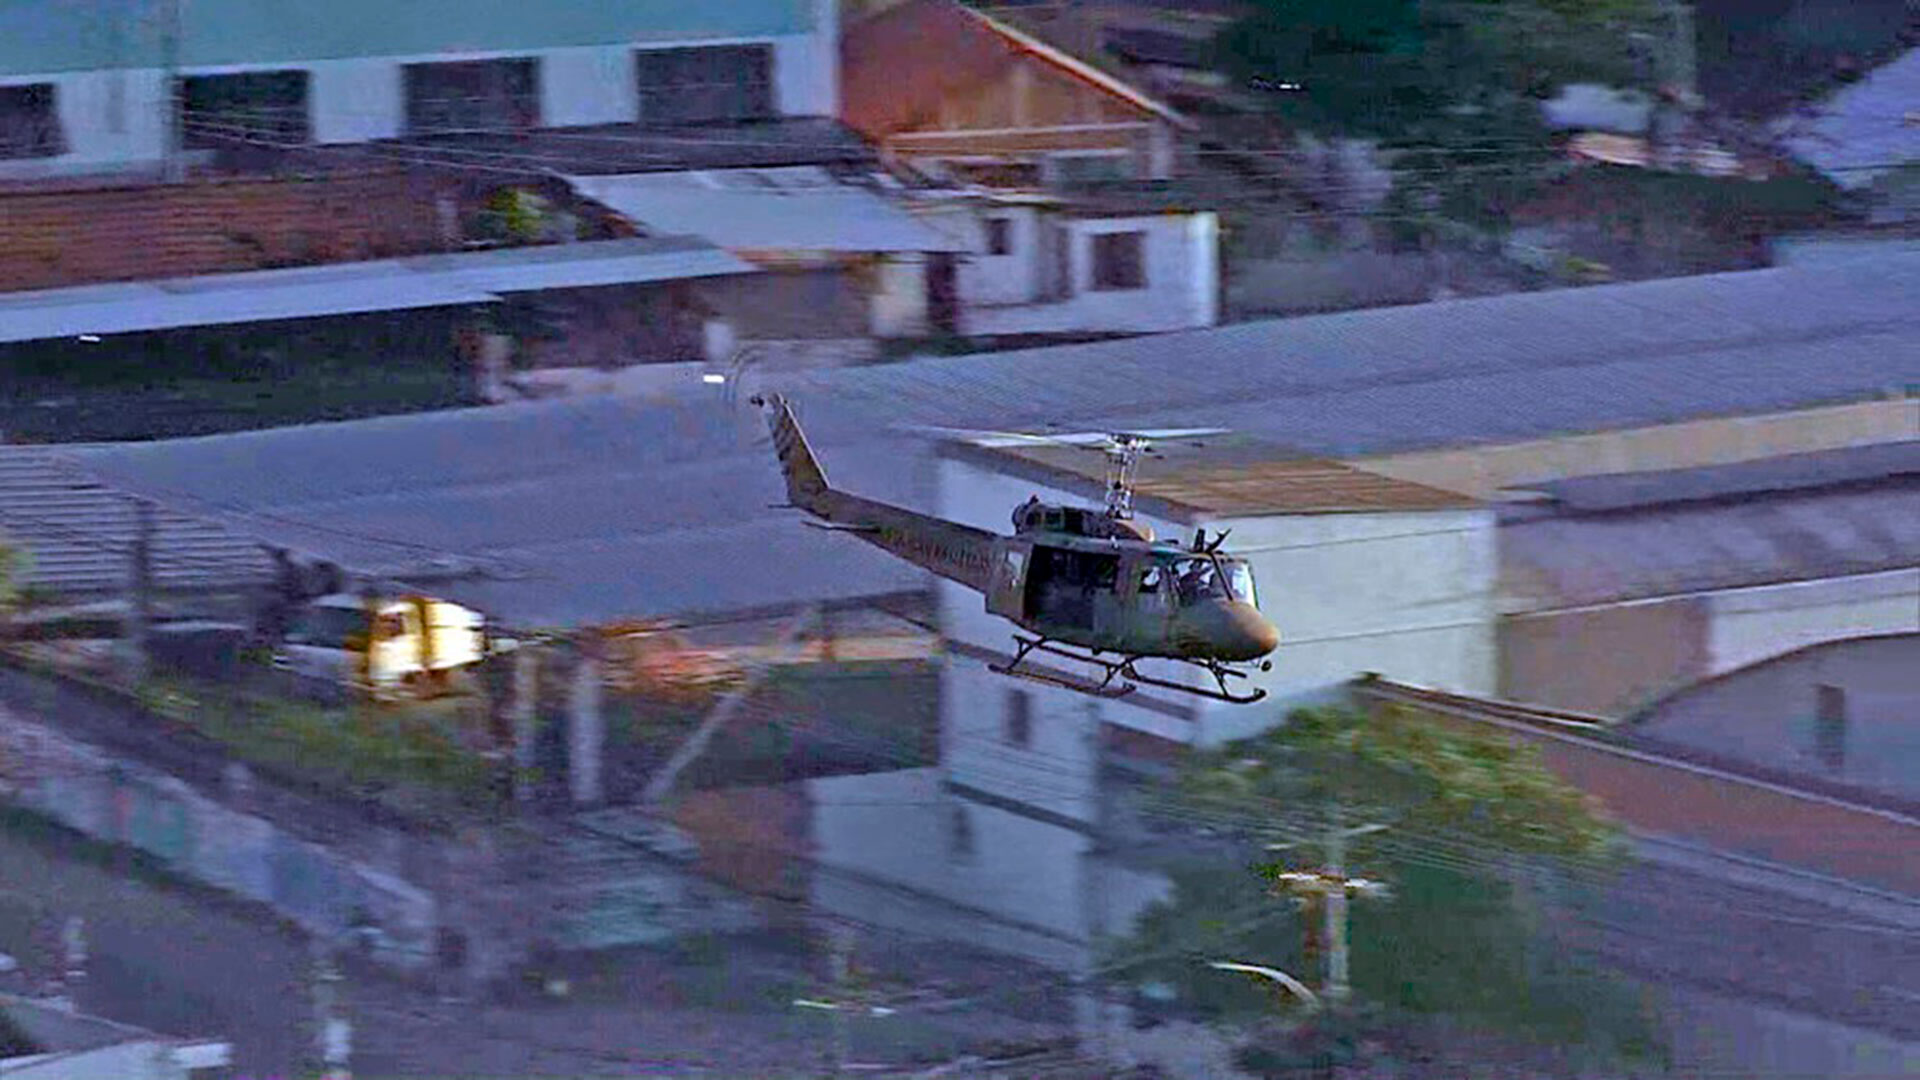 An Army Police Helicopter in Full Operation (Reproduction / TV Globo)